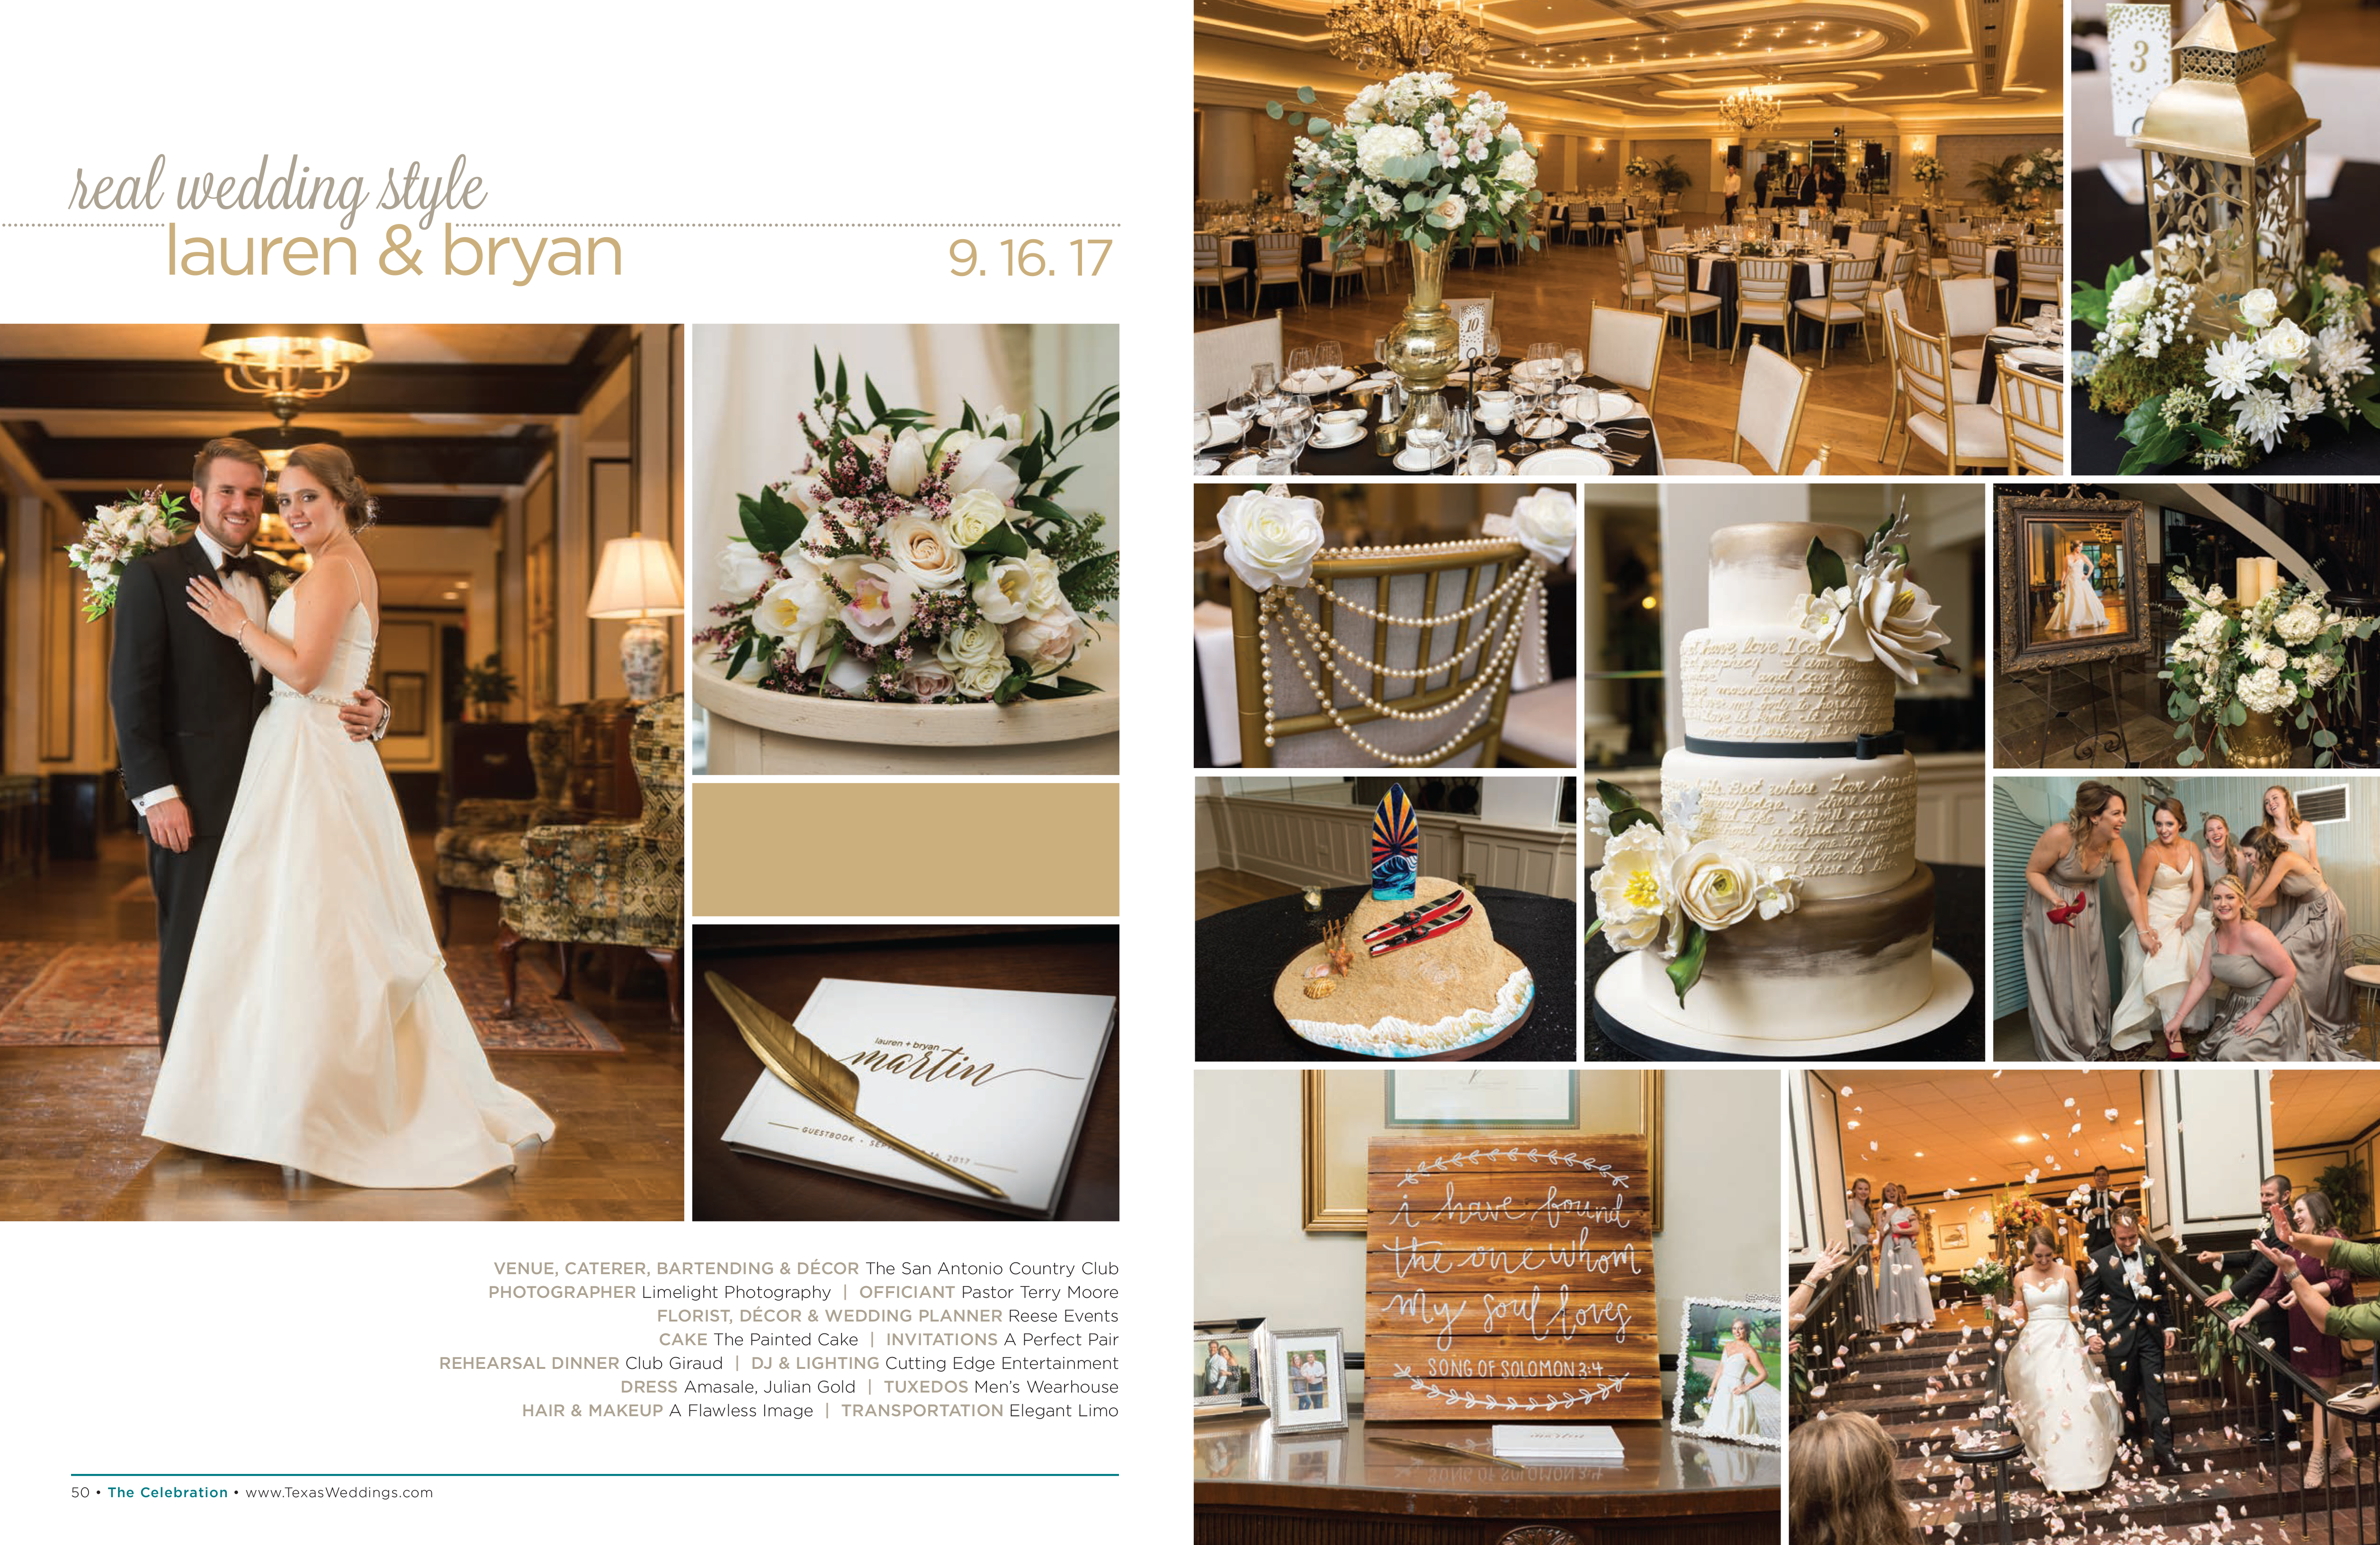 Lauren & Bryan in their Real Wedding Page in the Spring/Summer 2018 Texas Wedding Guide